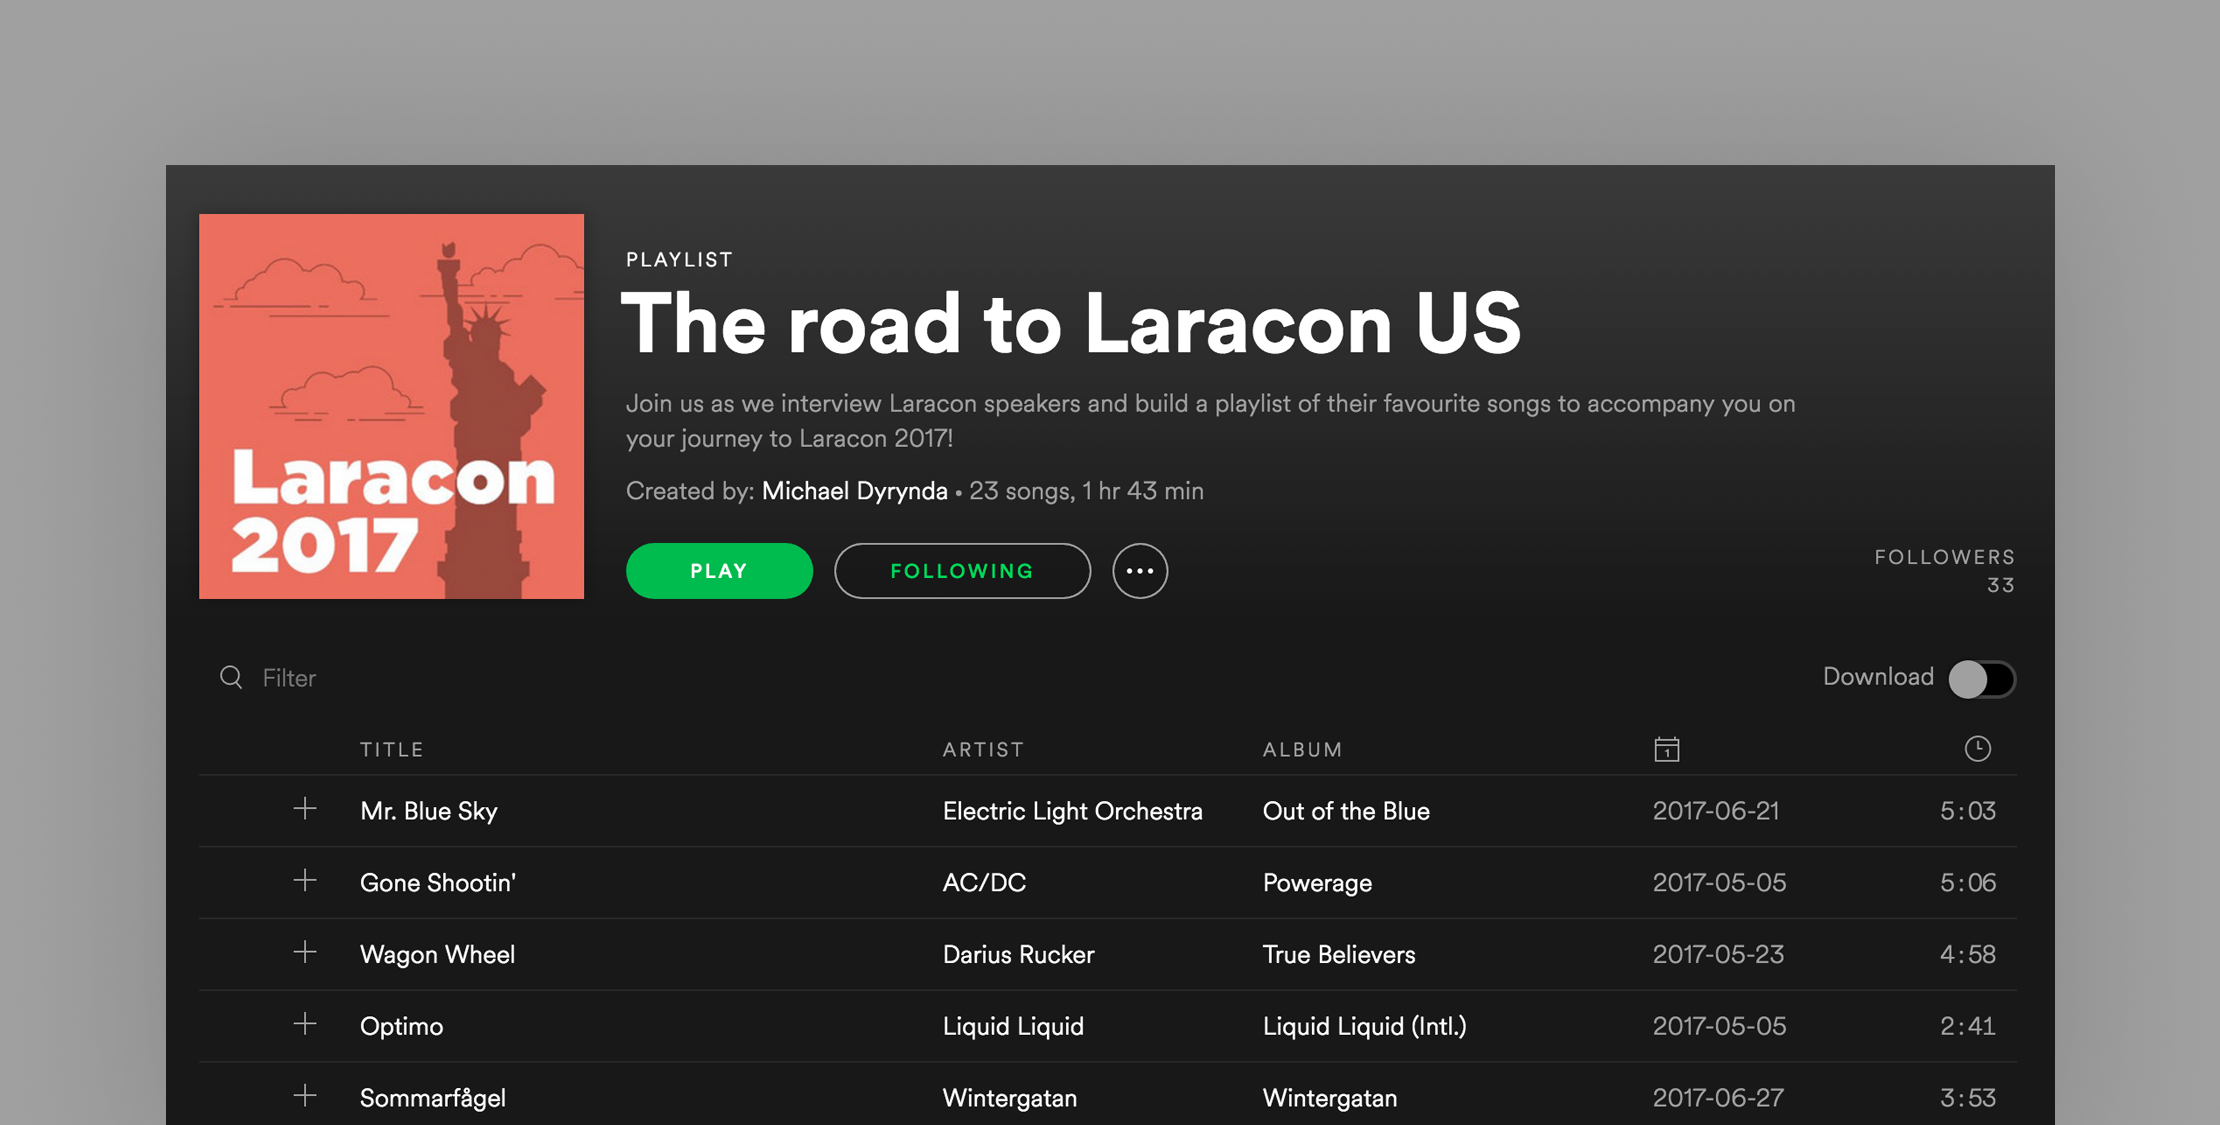 The Road To Laracon Soundtrack image